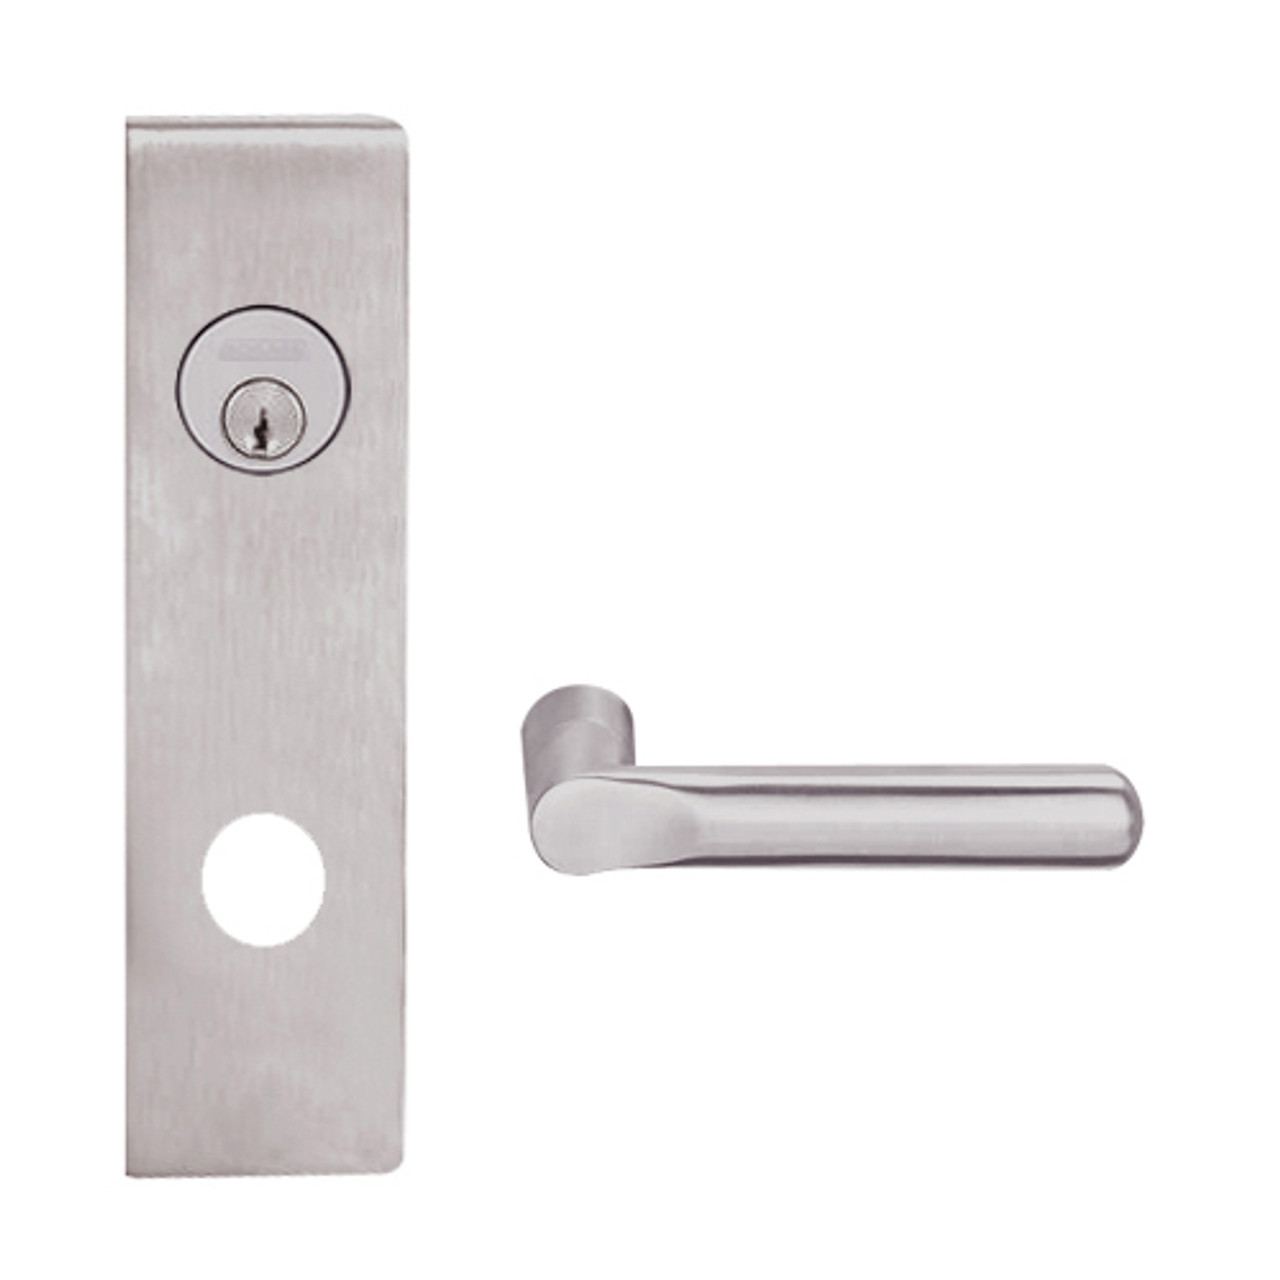 L9453L-18N-630 Schlage L Series Less Cylinder Entrance with Deadbolt Commercial Mortise Lock with 18 Cast Lever Design in Satin Stainless Steel